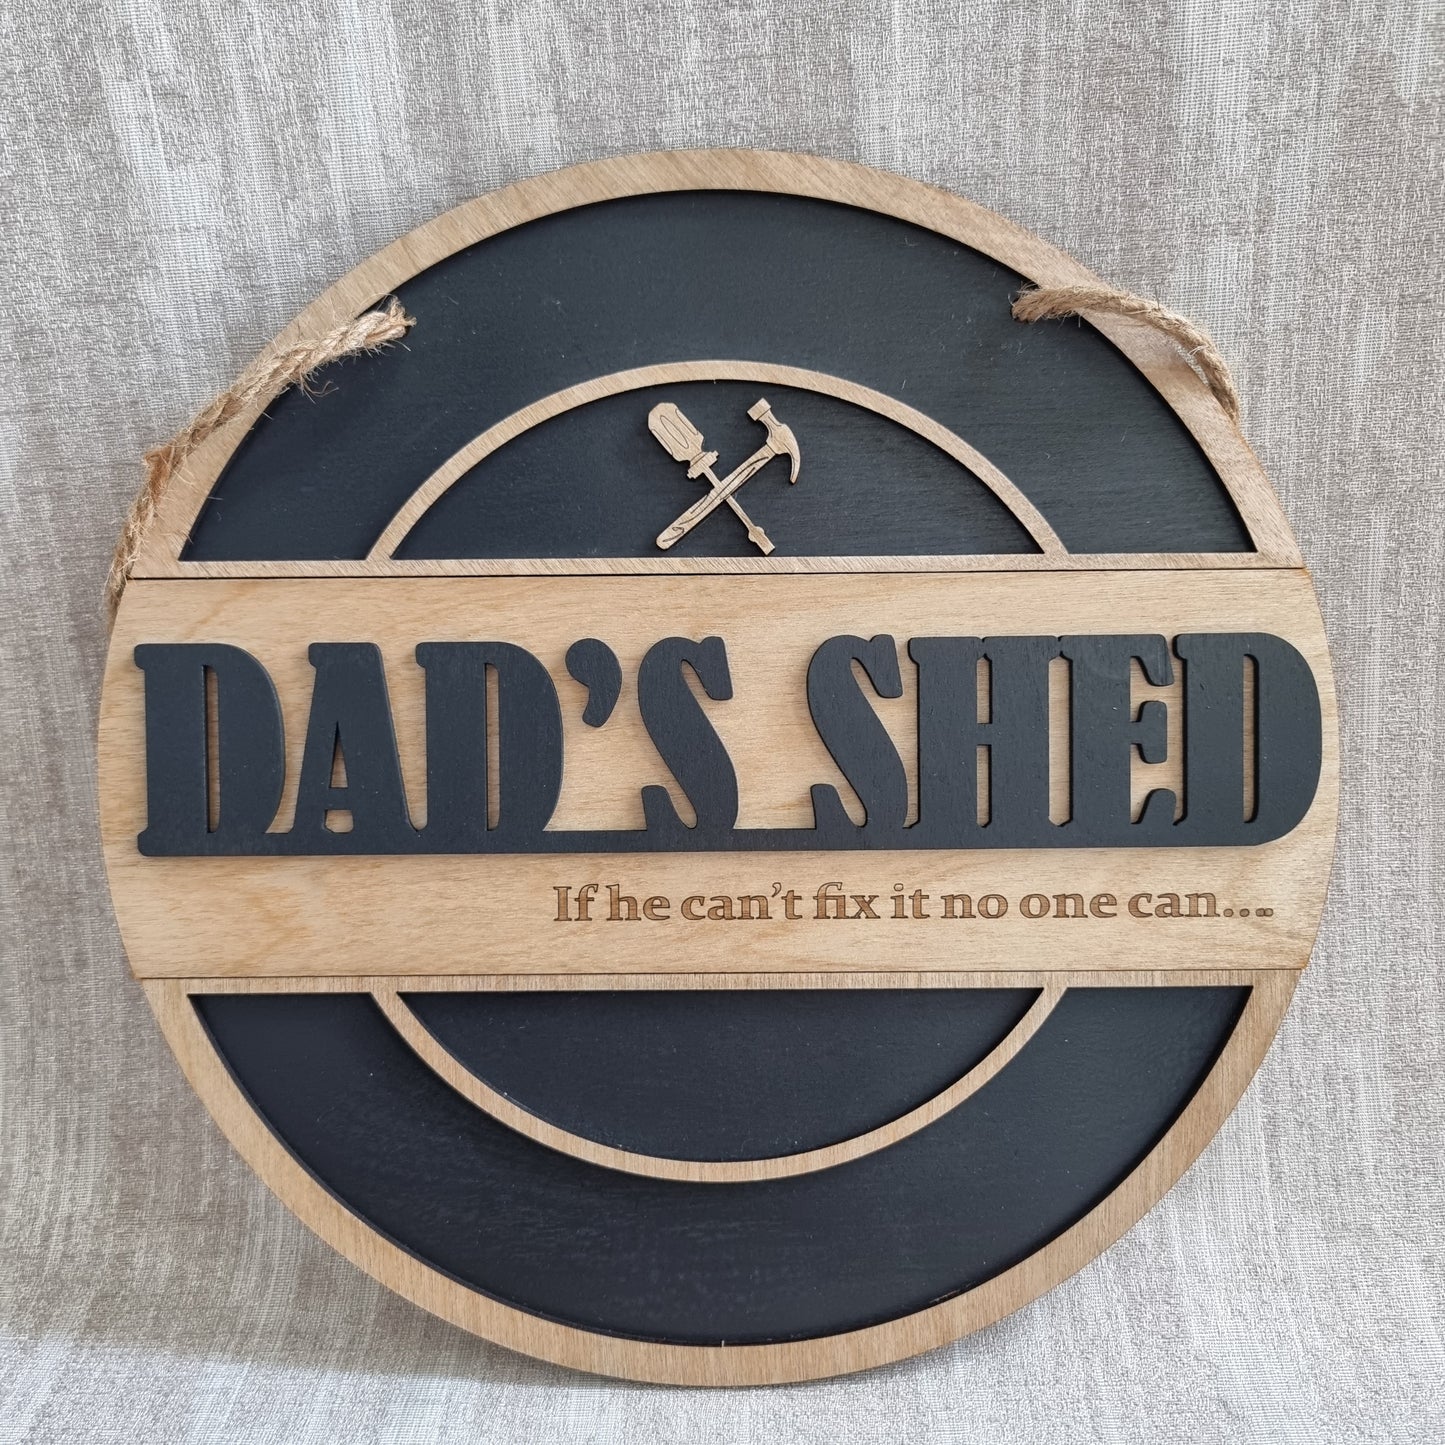 Dad's Shed Wooden Sign - If he can't fix it no one can...